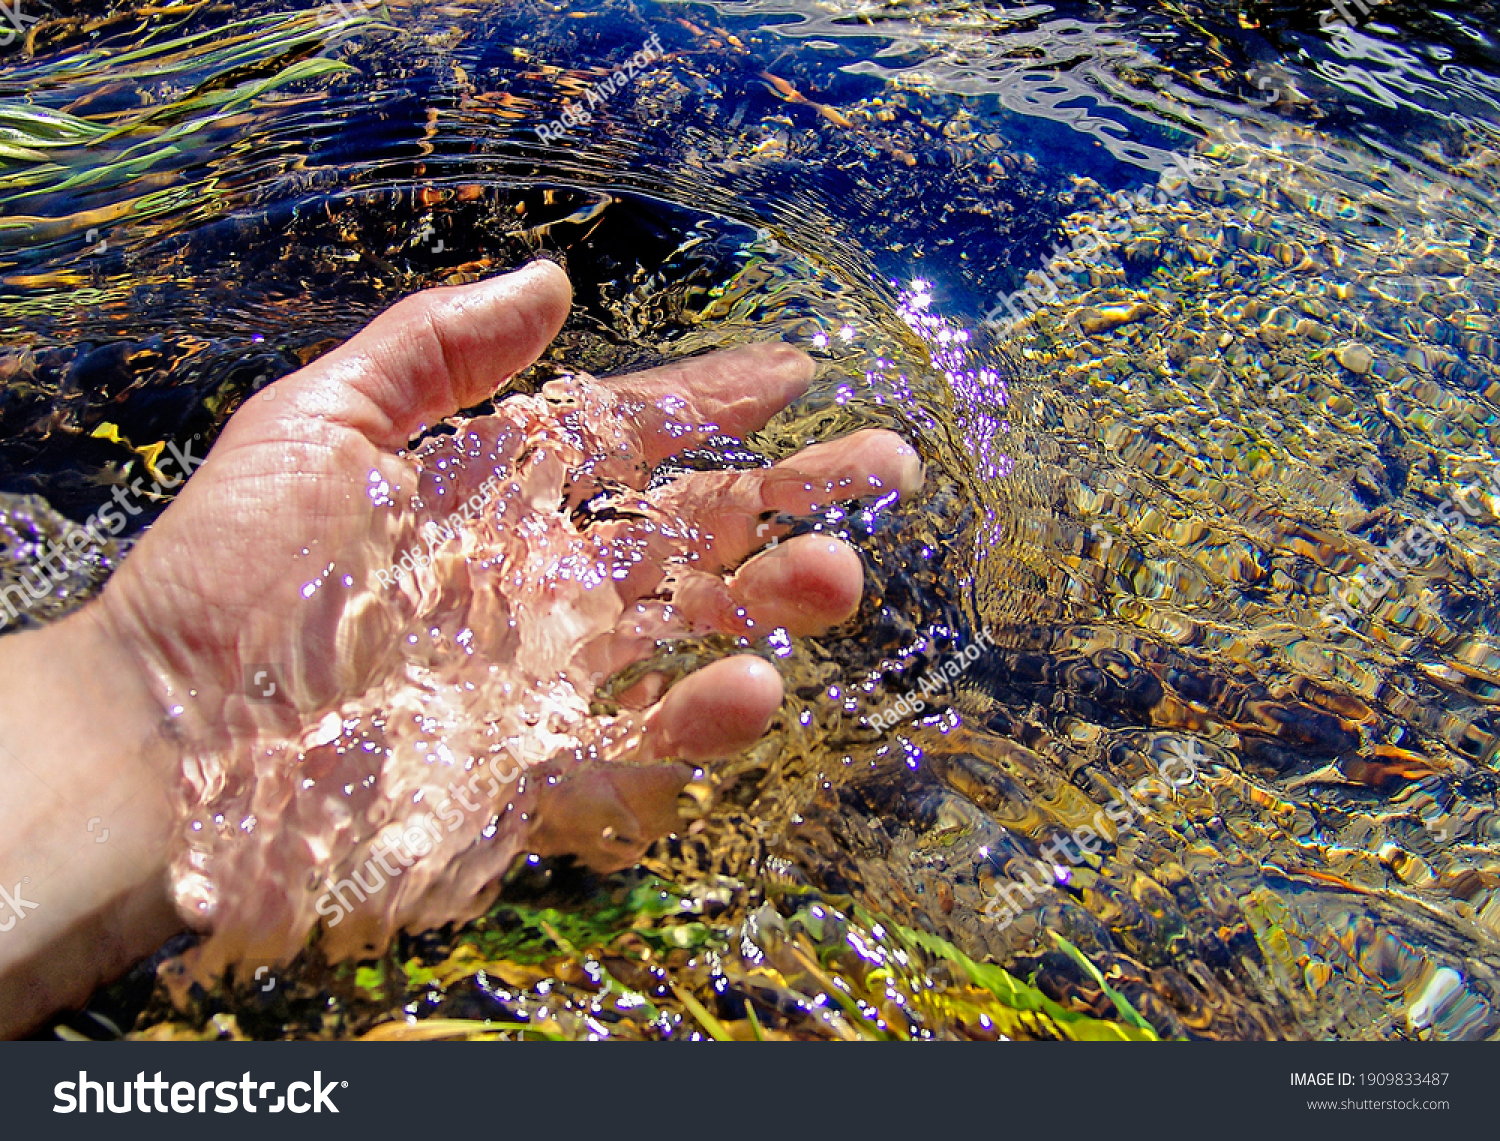  In sunny weather, the hand touches the cool water in the river. The water is clear and you can see the bottom and the rocks on the bottom.                               #1909833487